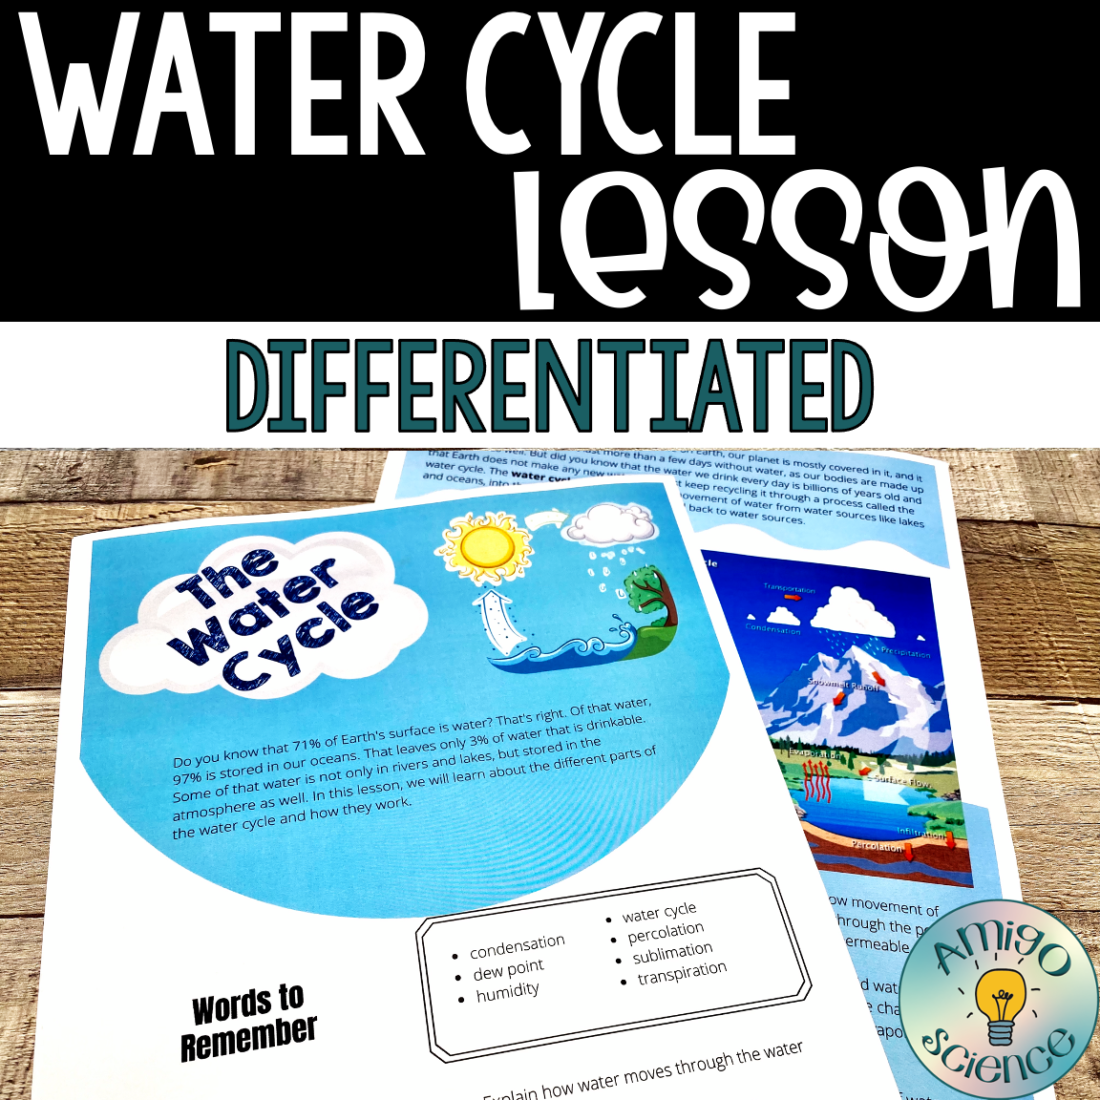 water cycle lesson, water cycle, diagram activity, water cycle interactive activity